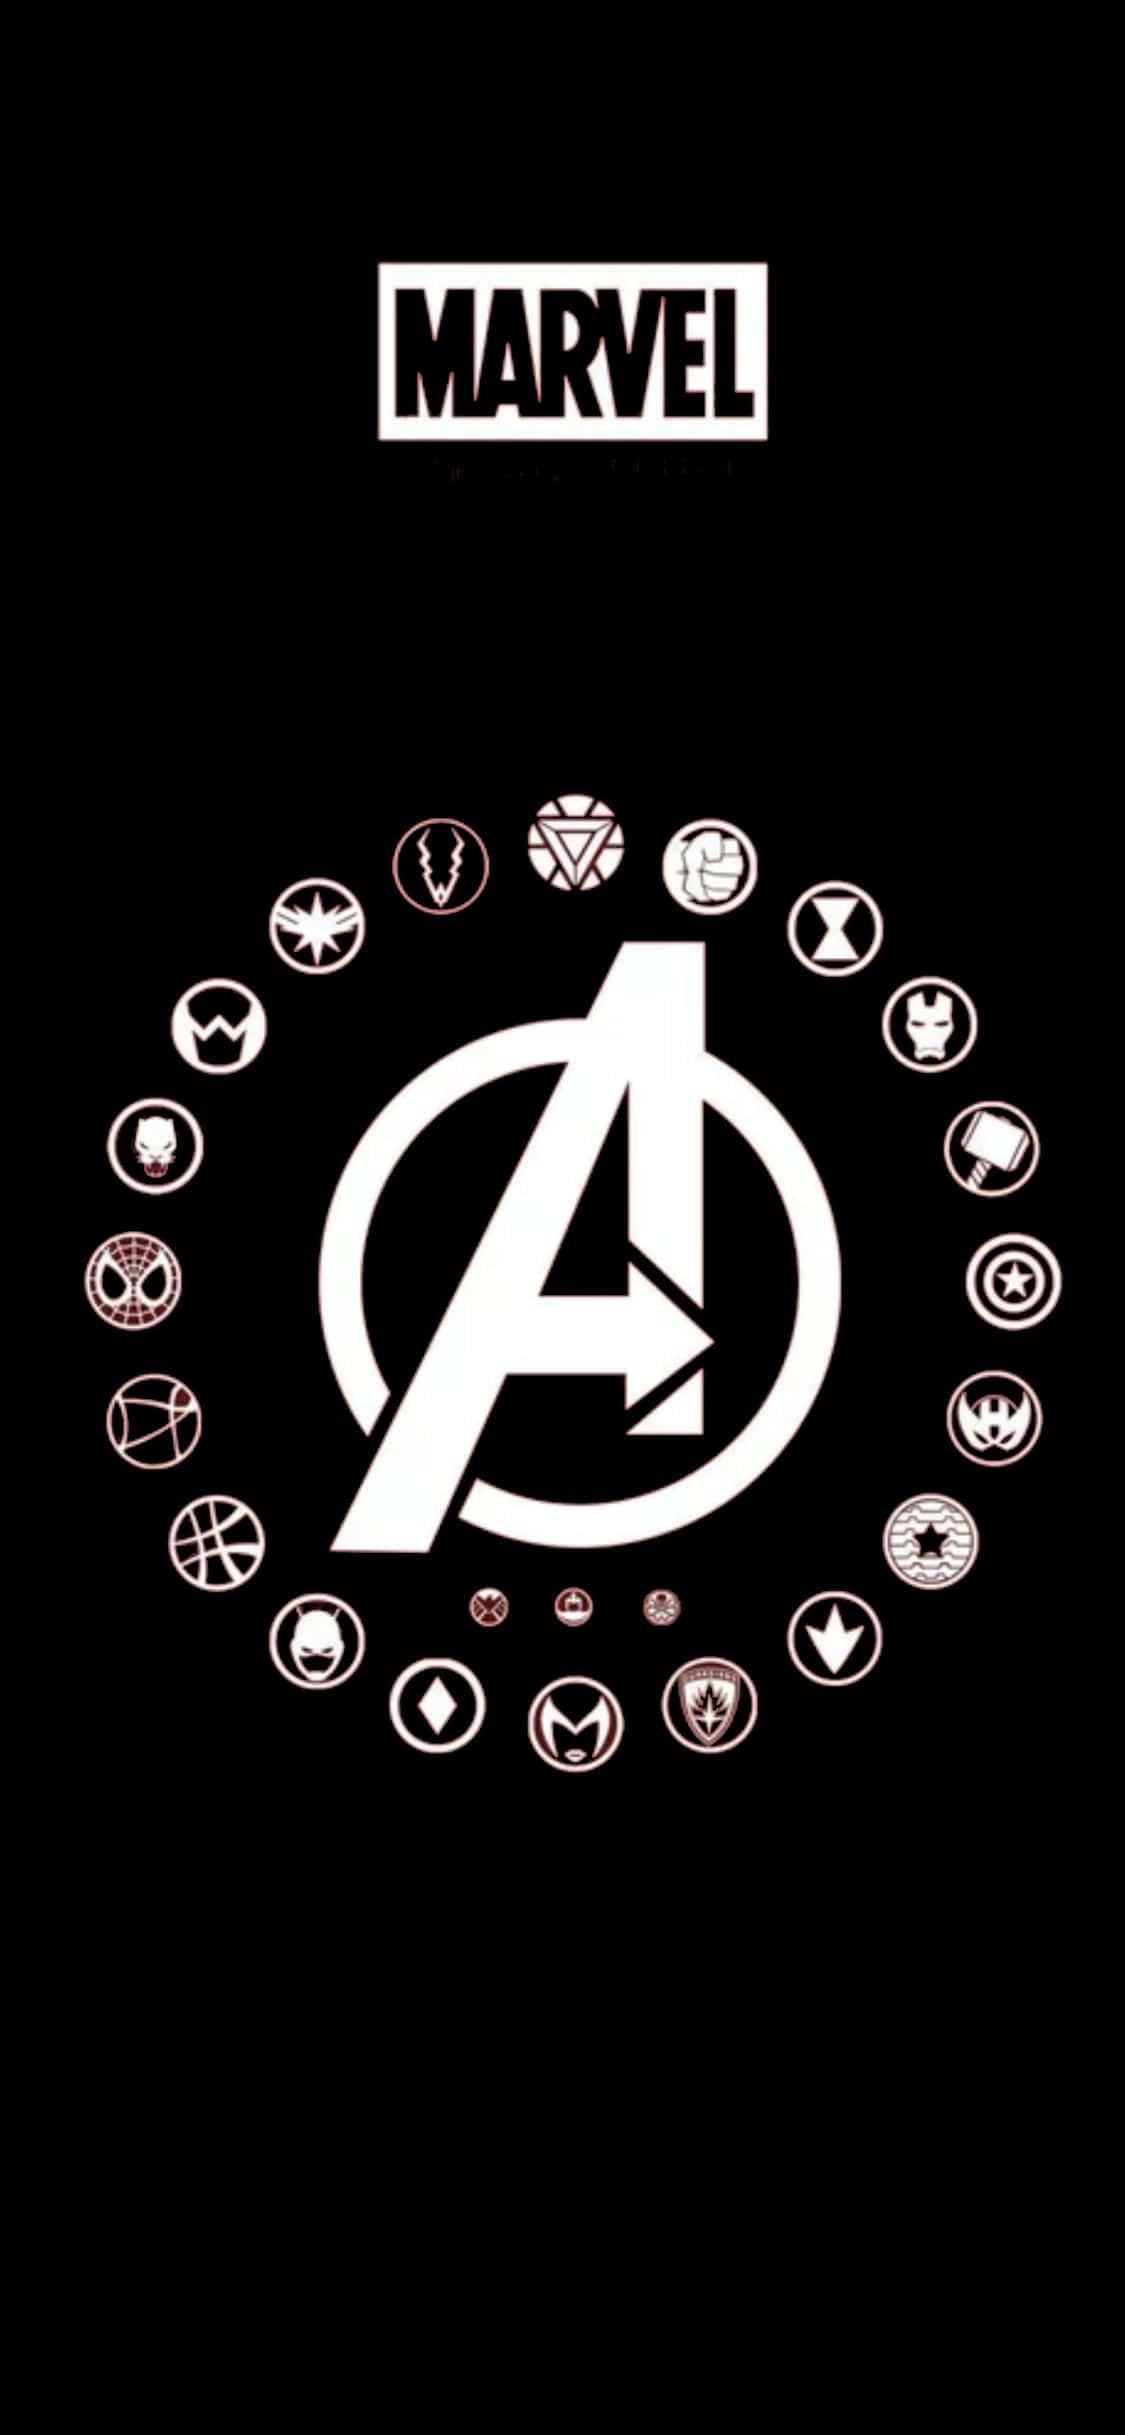 Download iPhone XS Avengers Logo Background With Superheroes